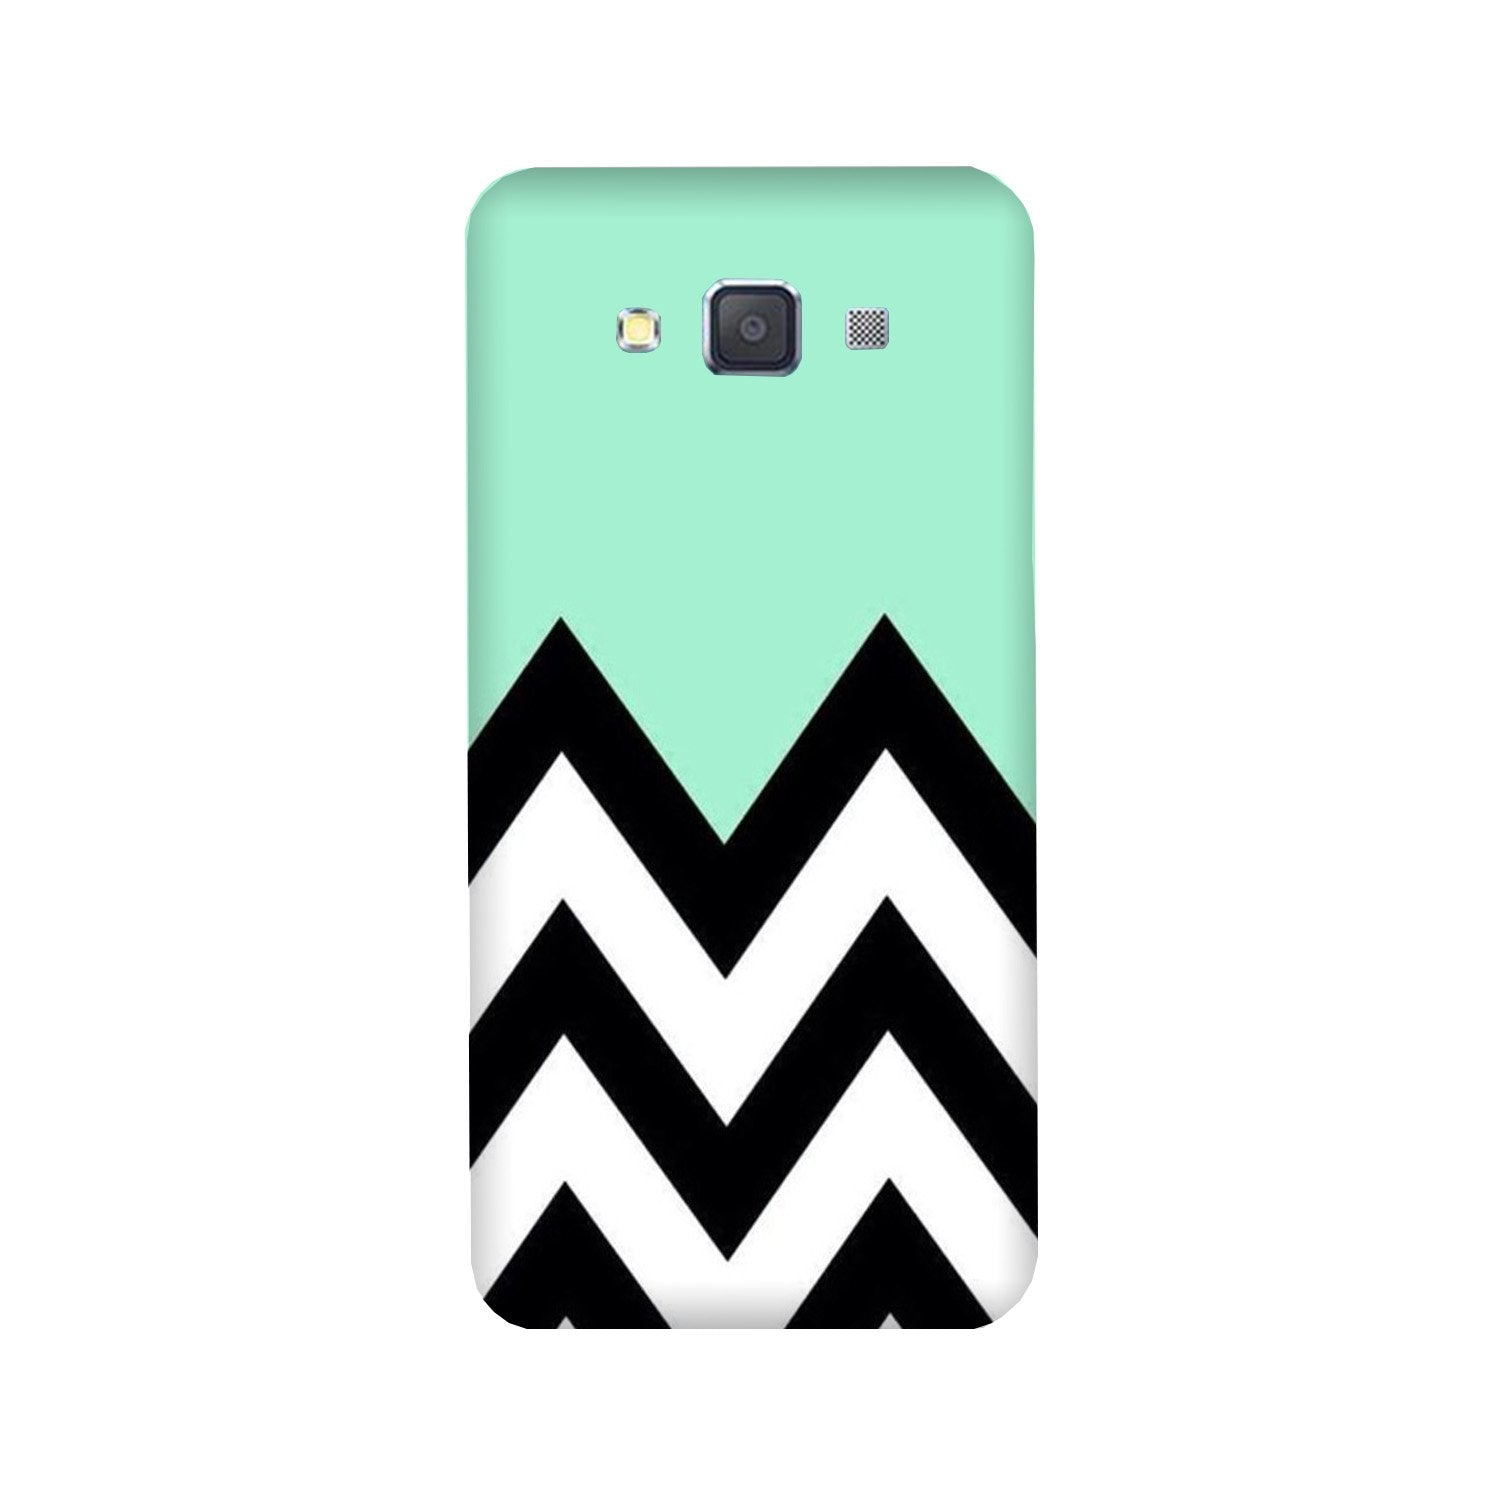 Pattern Case for Galaxy ON7/ON7 Pro